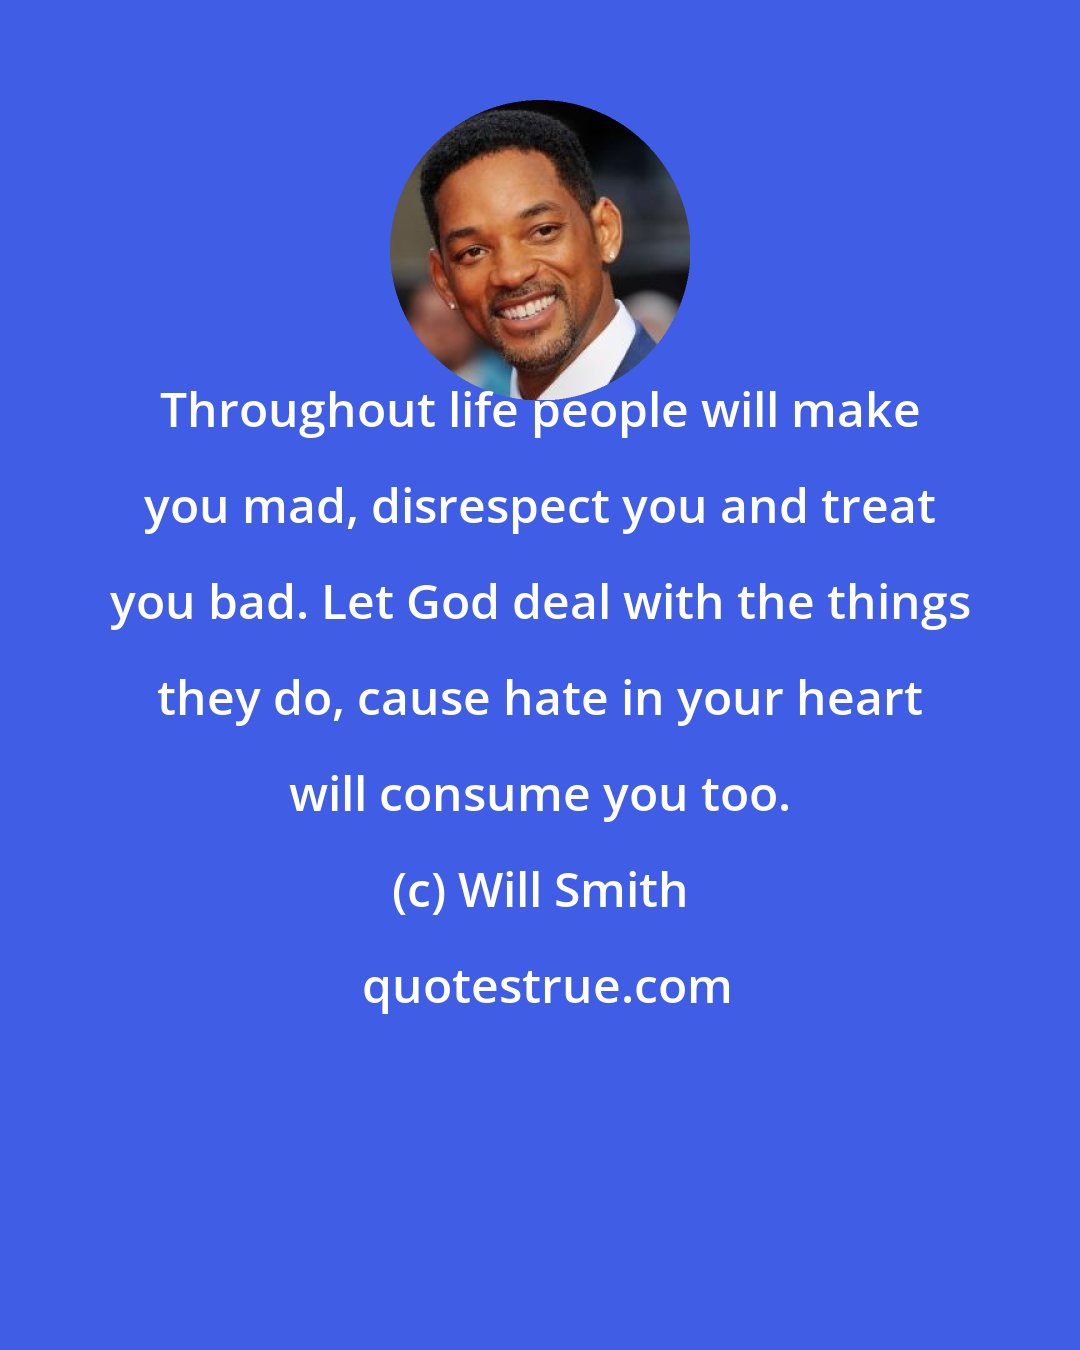 Will Smith: Throughout life people will make you mad, disrespect you and treat you bad. Let God deal with the things they do, cause hate in your heart will consume you too.